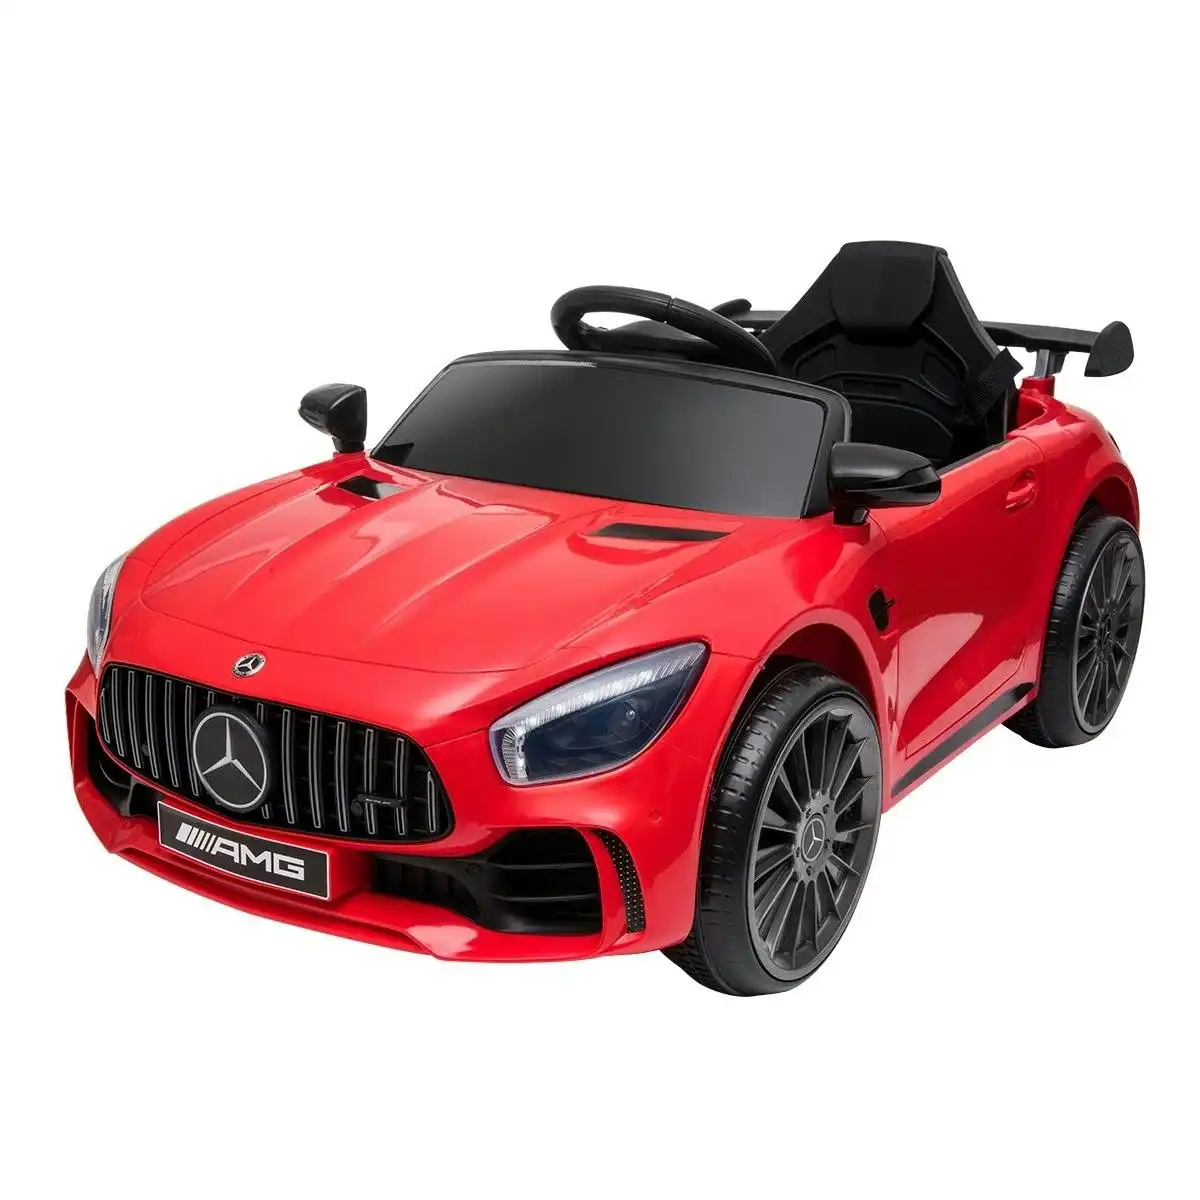 Ausway Mercedes-Benz Licensed Children Kids Electric Cars Ride on Toy 2.4G R/C Remote Control Age 3+ Red